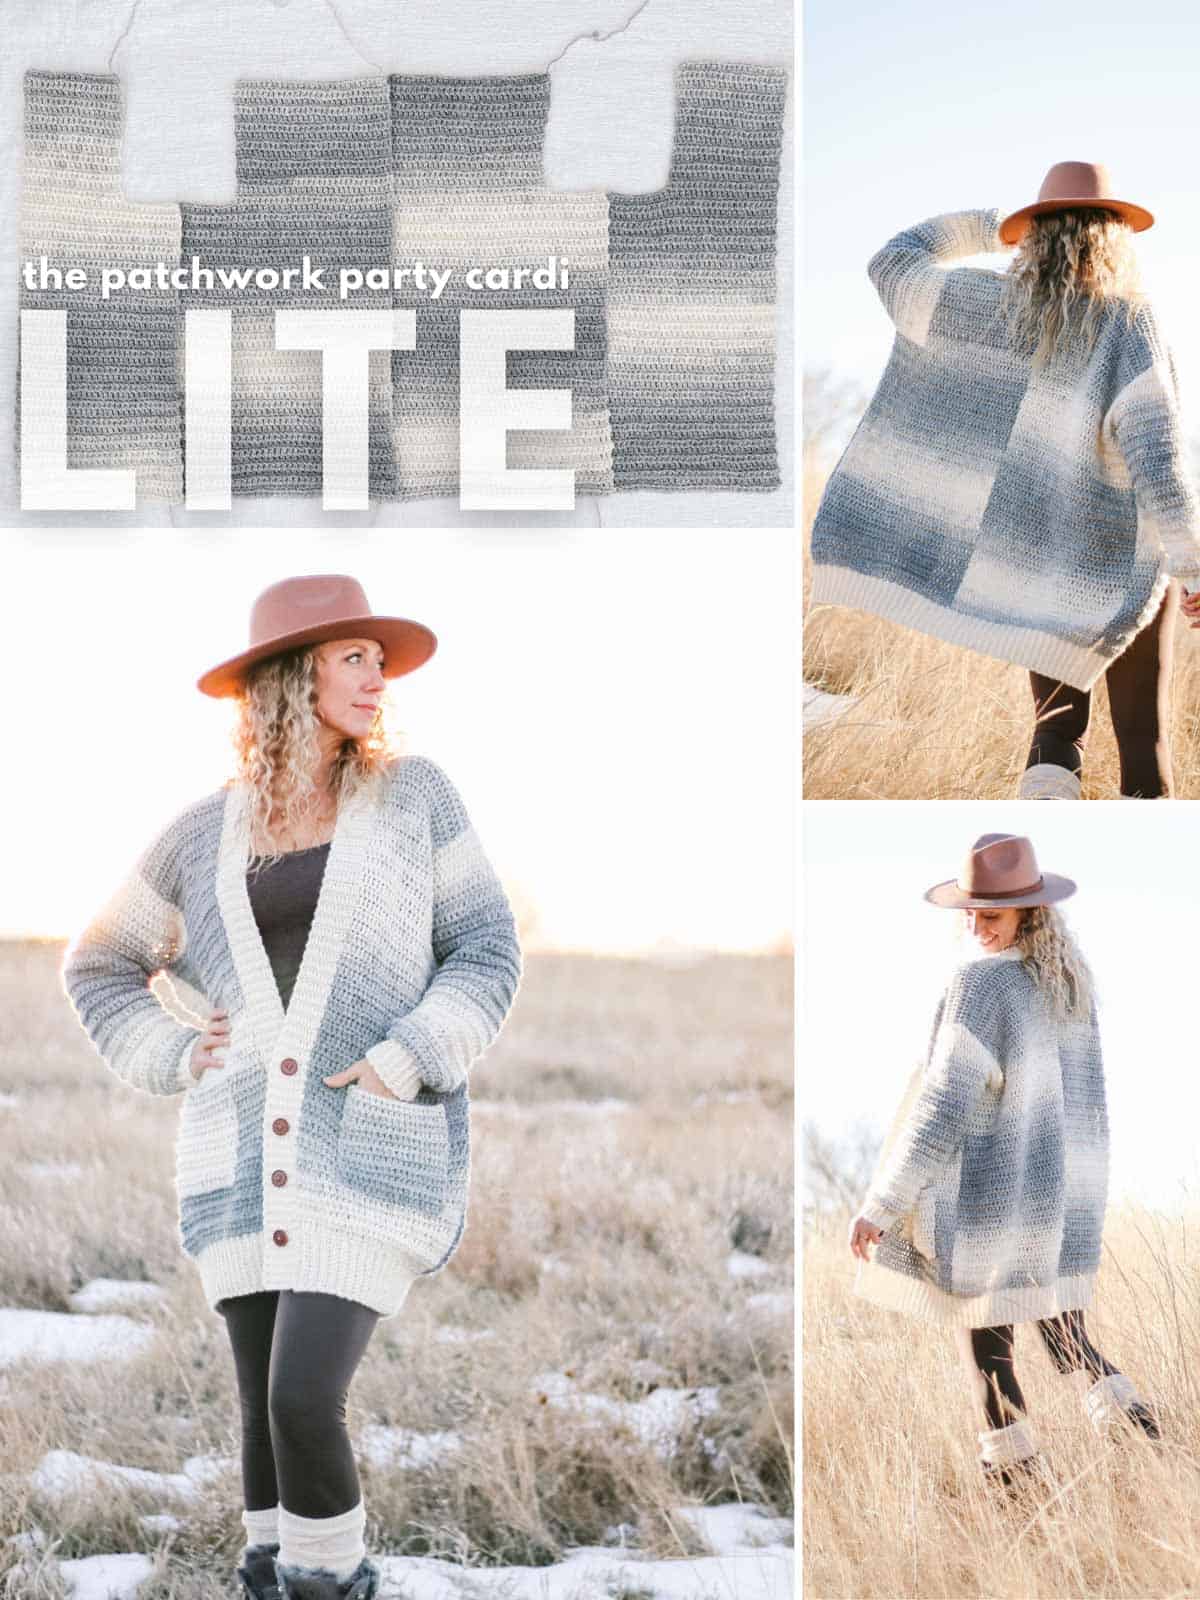 This photo is a grid of four images. The images are showing a blonde woman standing in a grassy, snowy field. She is wearing a gray and white ombré button up crochet cardigan with black leggings, snow boots and a brown hat. There is one tutorial photo showing how the crochet cardigan is made from simple rectangles.